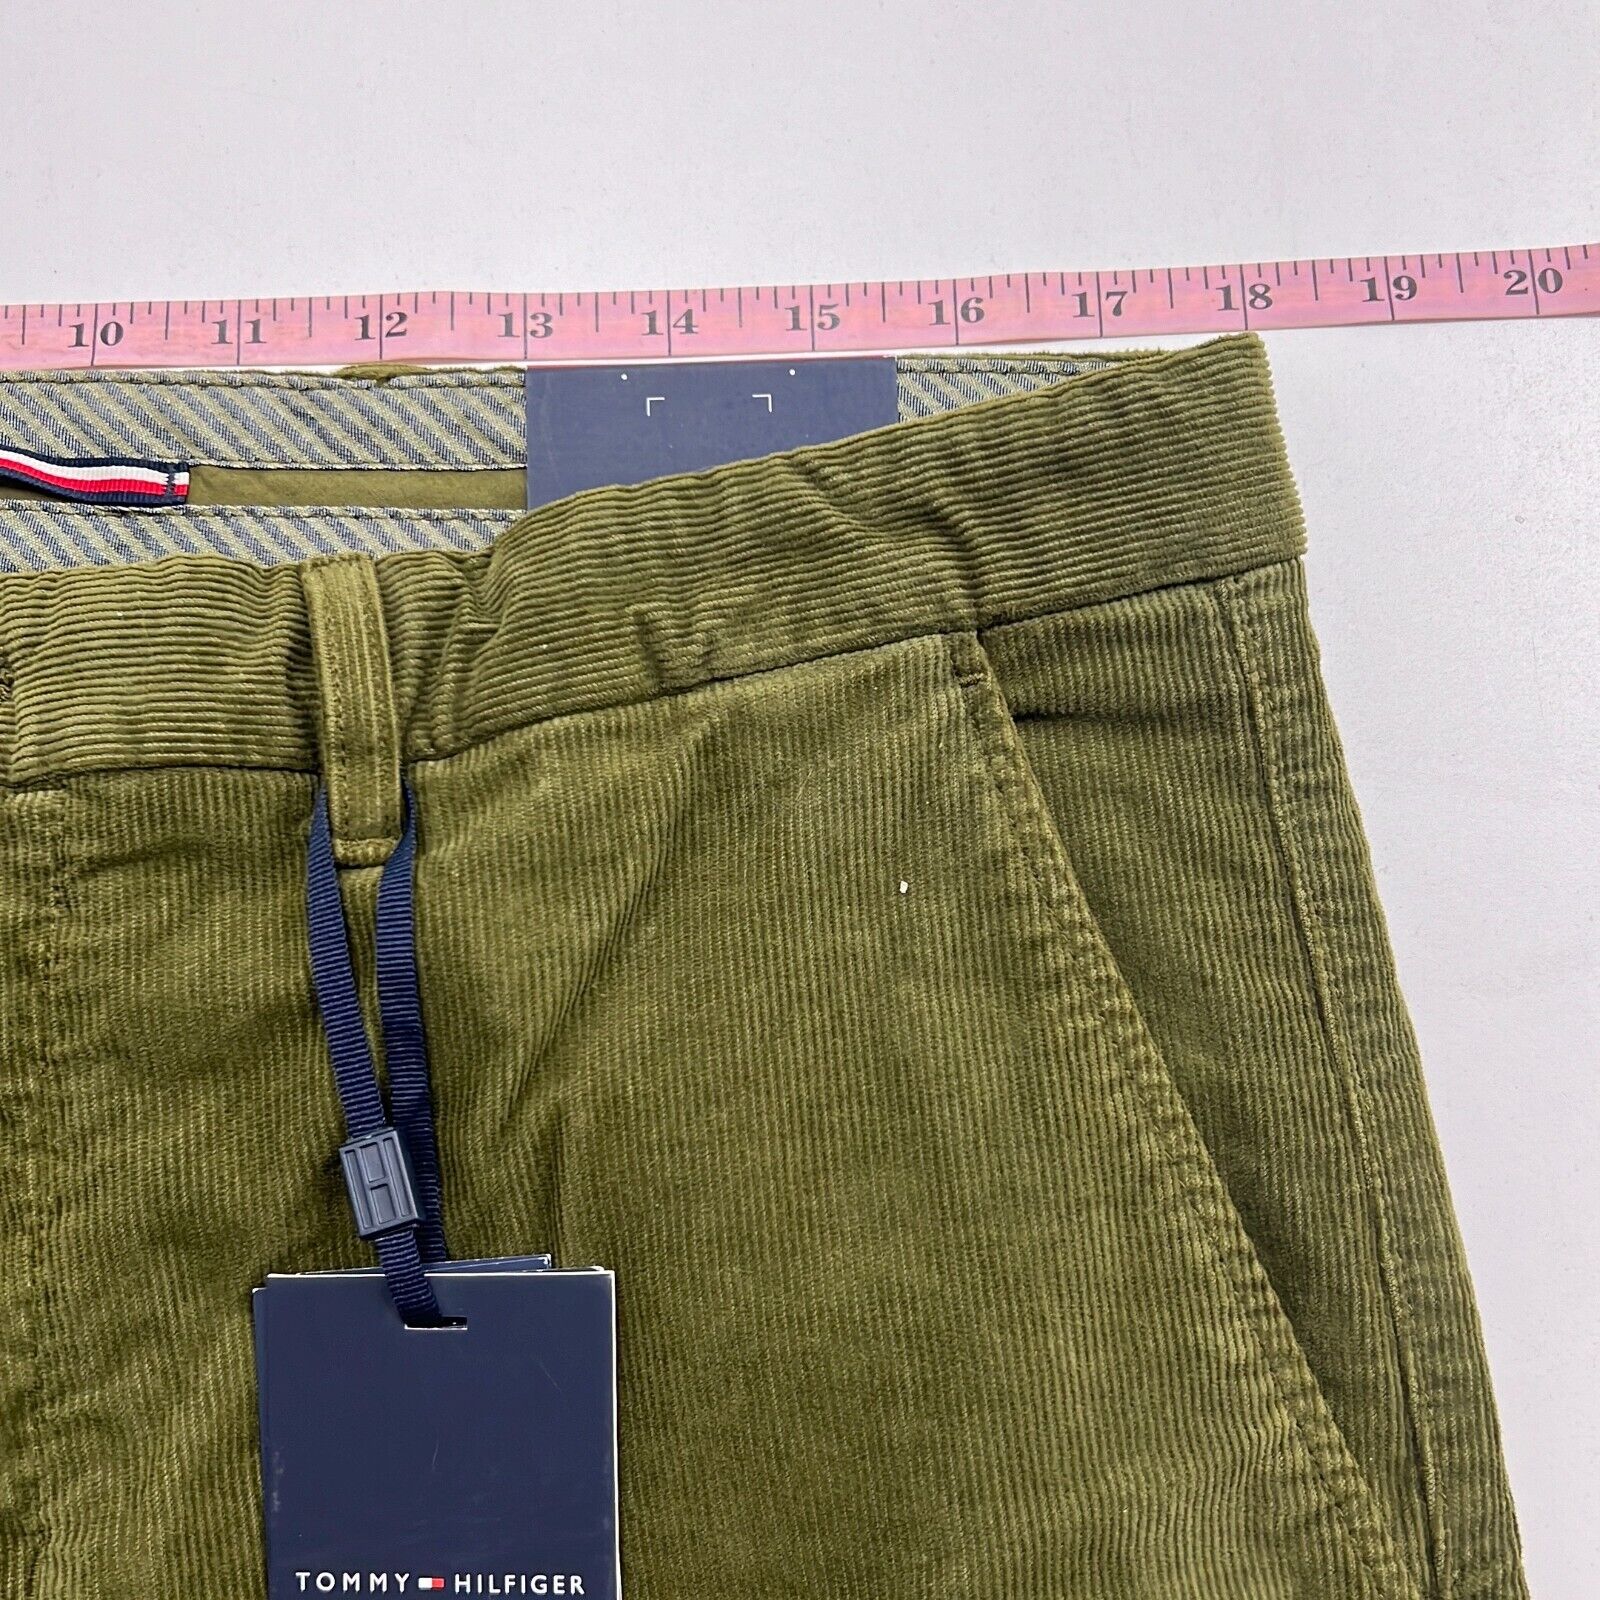 NWT Tommy Hilfiger Men's Green Straight Fit Corduroy Chino Pants Size 36x34